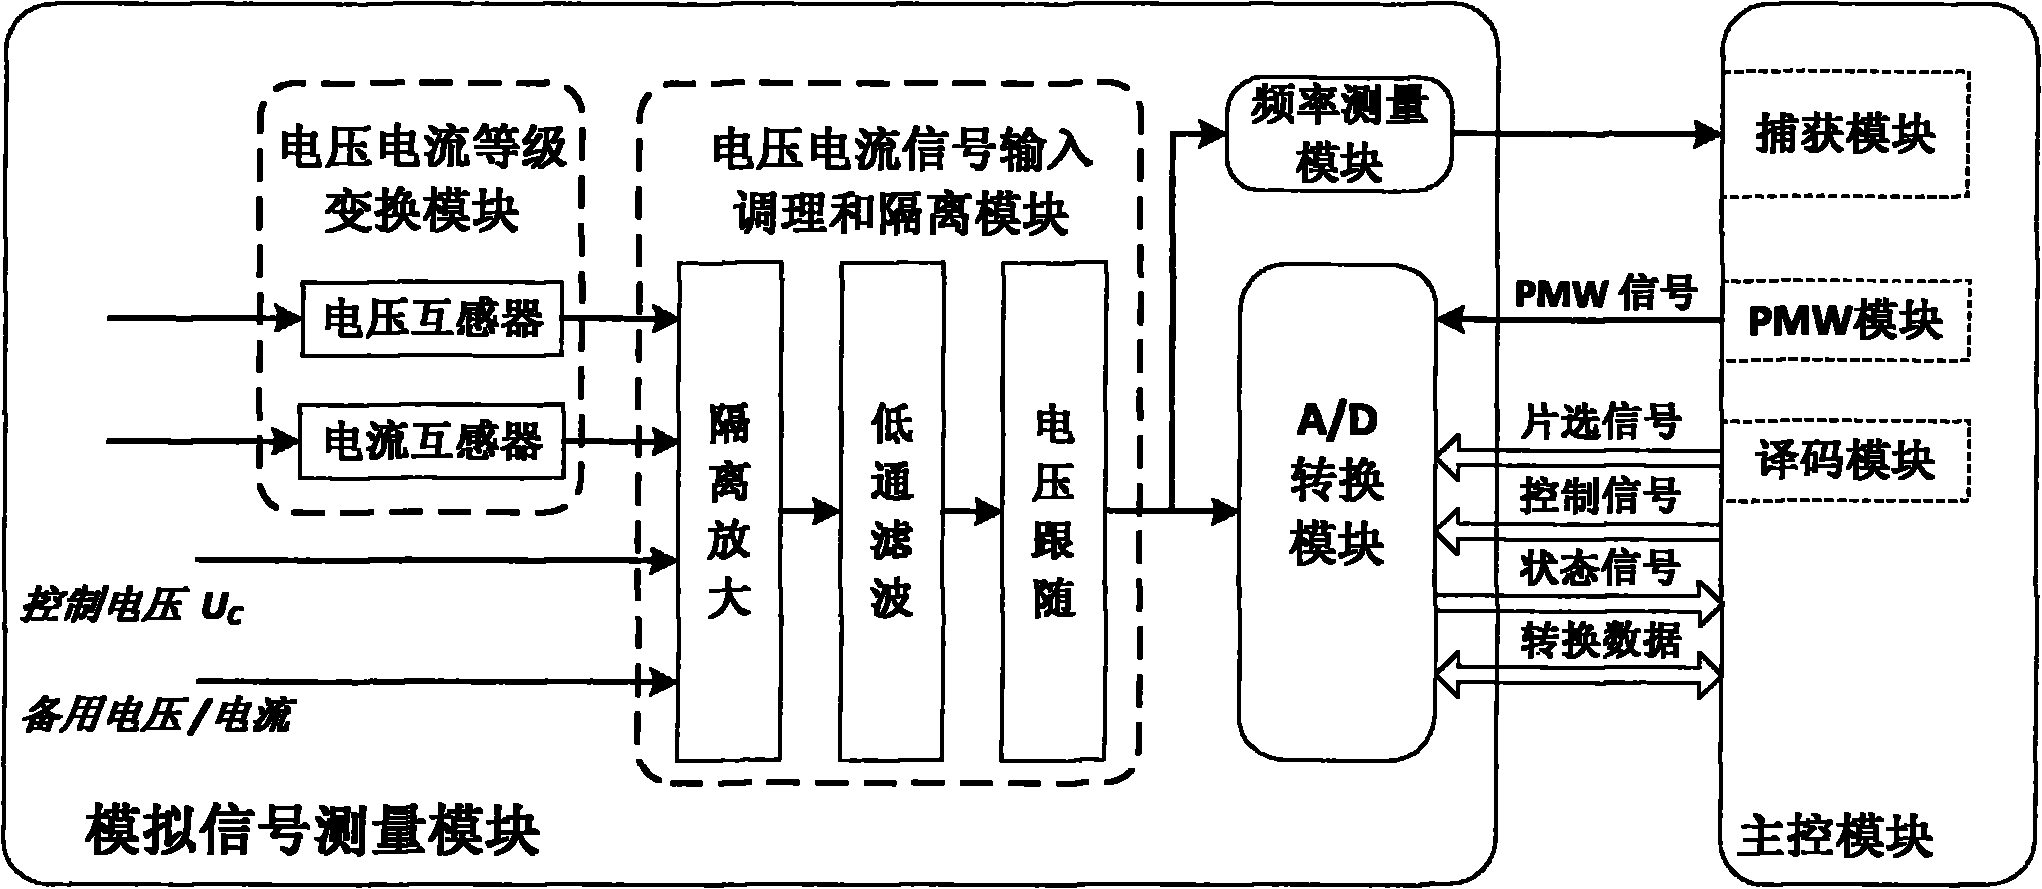 Excitation system simulation test device for synchronous generator